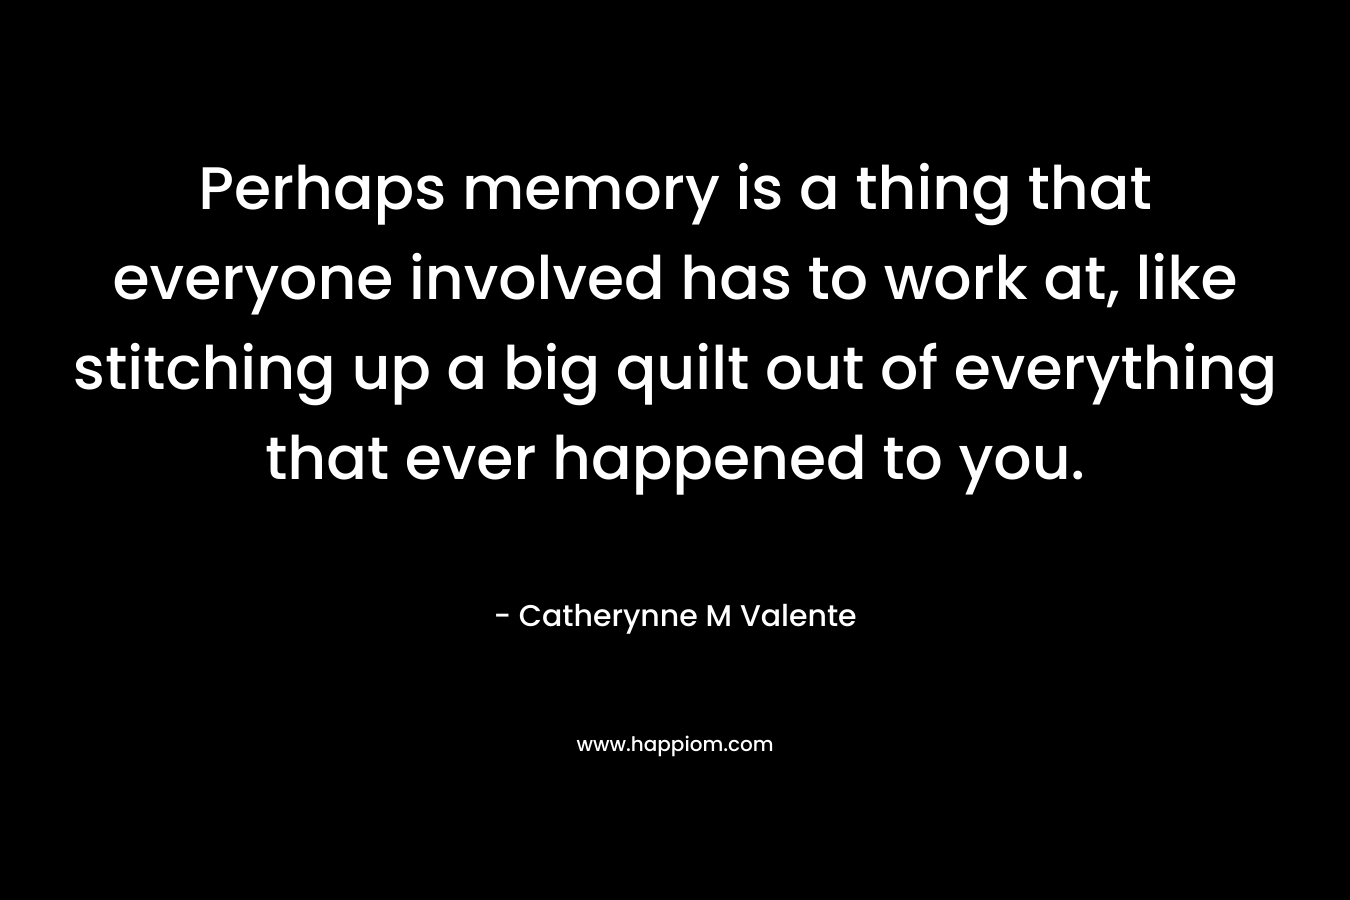 Perhaps memory is a thing that everyone involved has to work at, like stitching up a big quilt out of everything that ever happened to you.